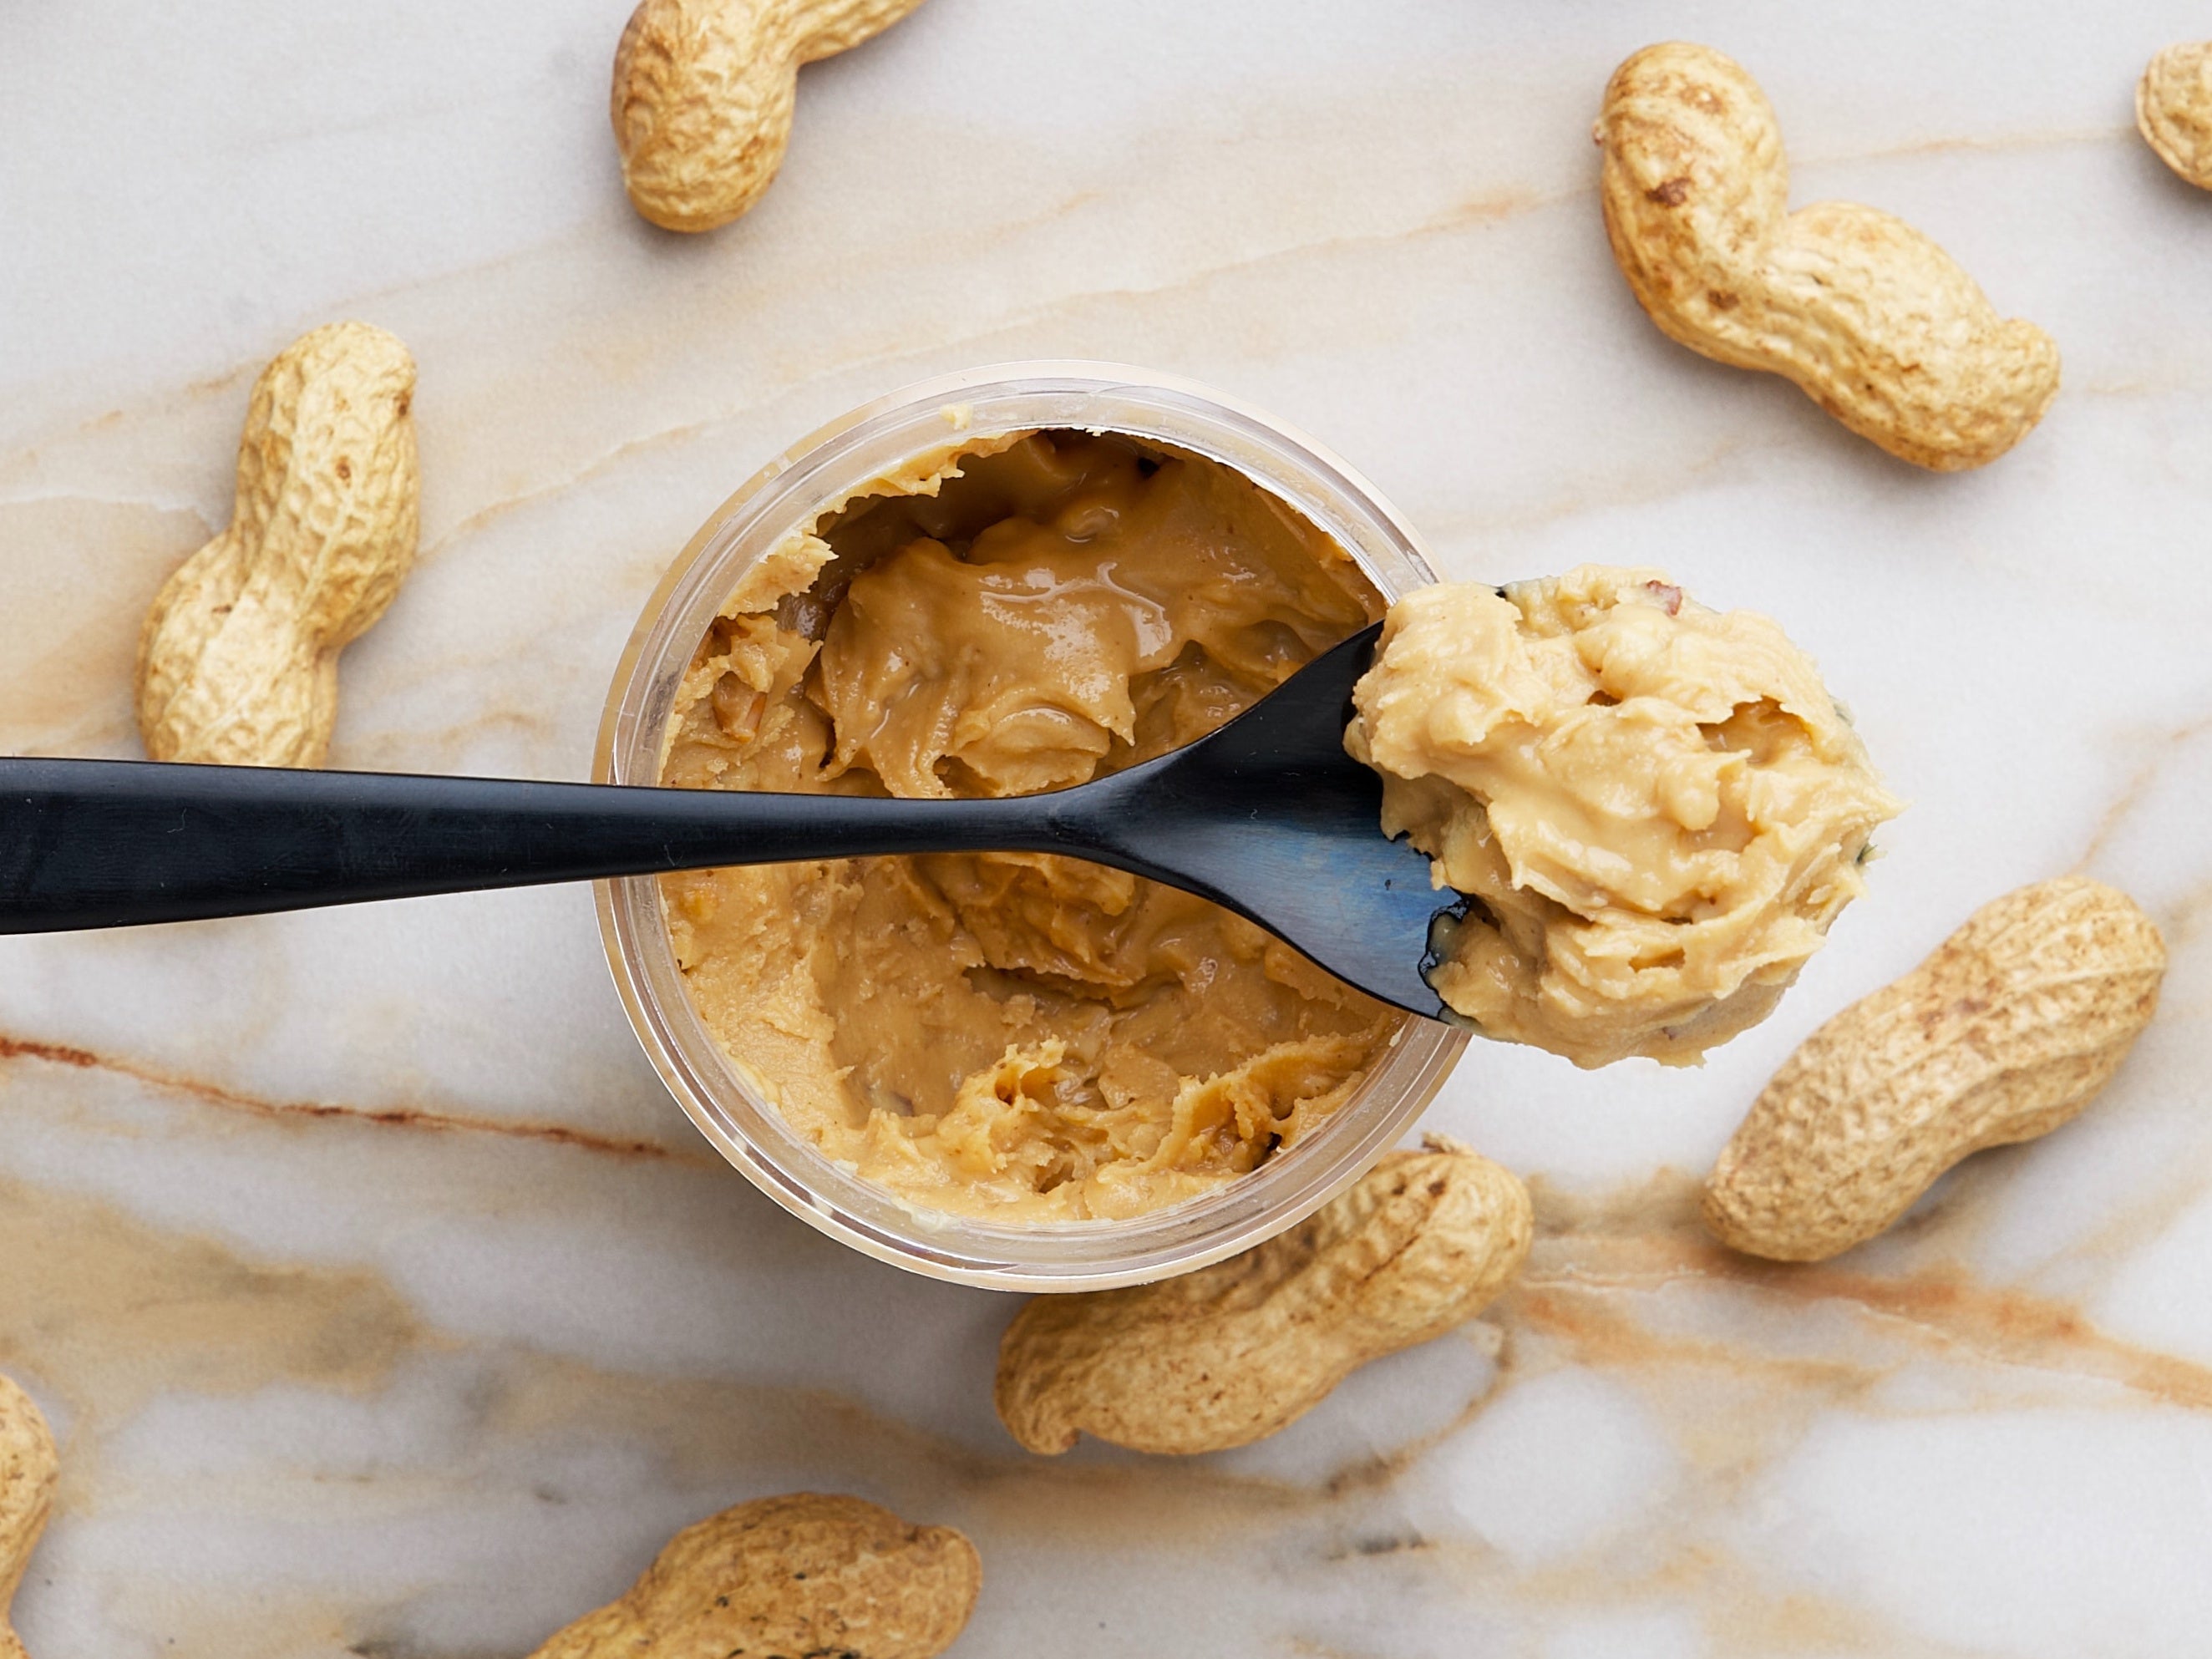 A crunchy dispute over peanut butter is smoothly resolved by the Full Federal Court